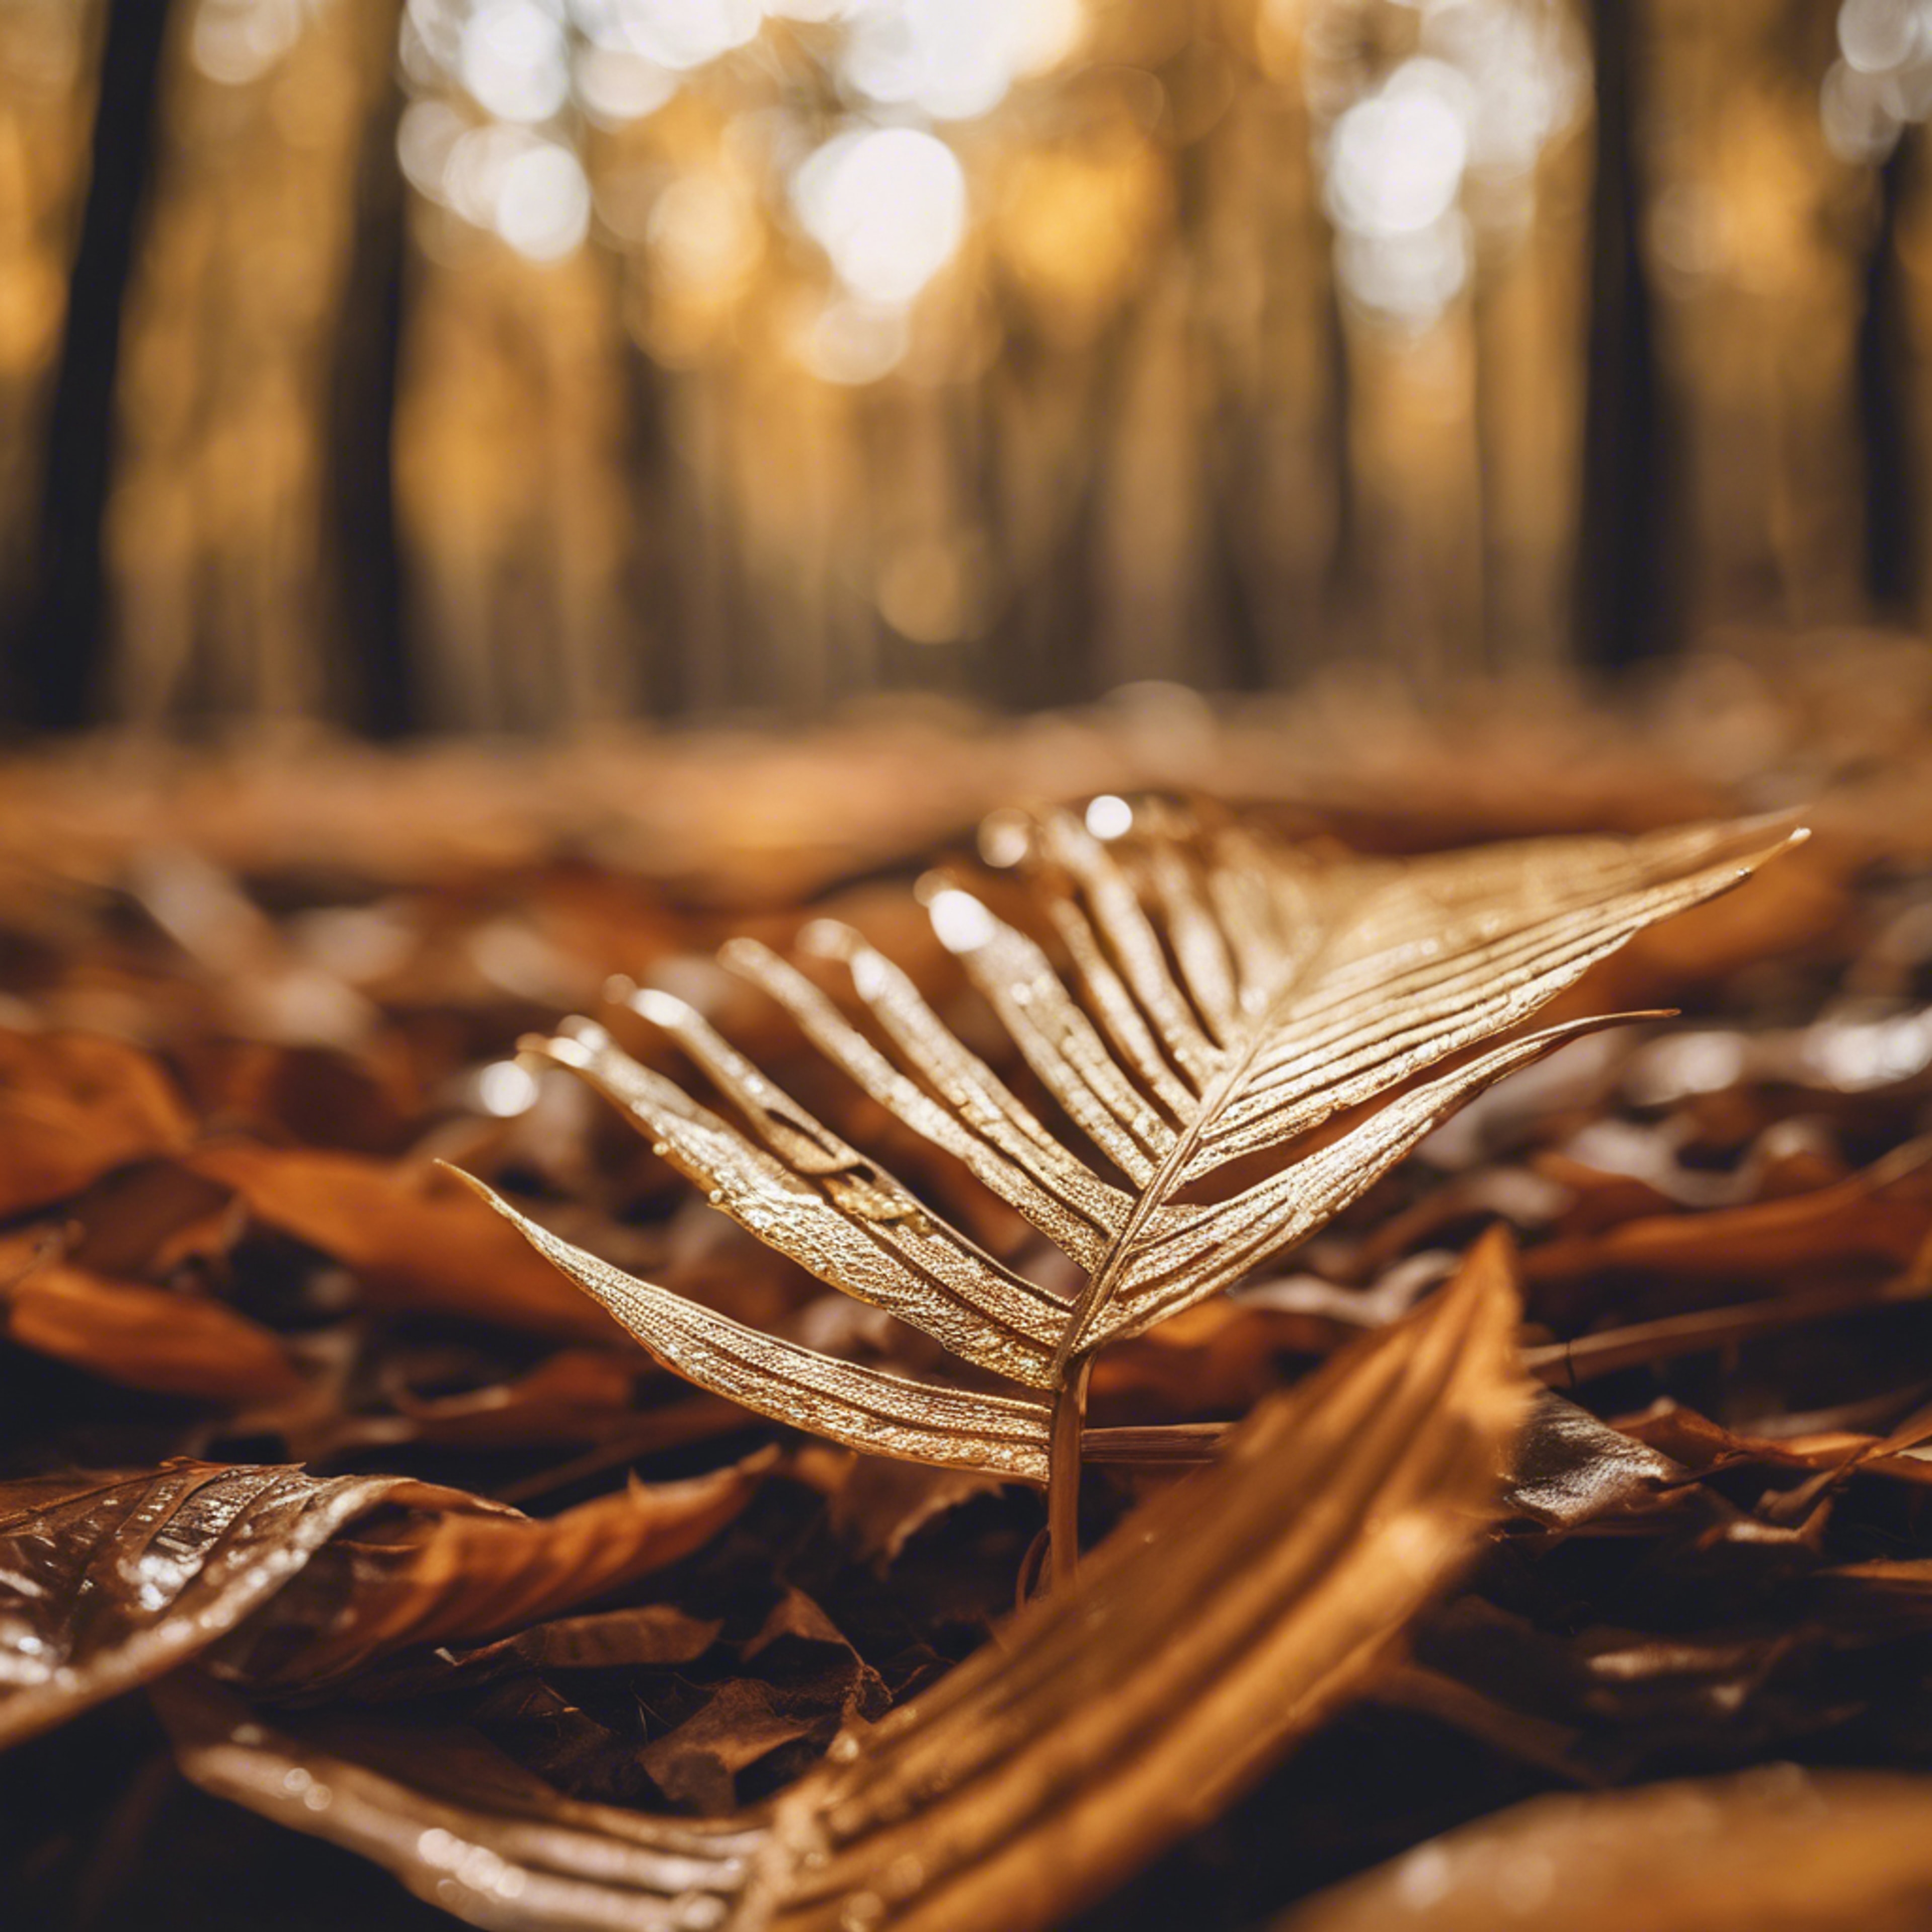 A fallen palm leaf, turned golden brown, on a forest floor during autumn.壁紙[6cc501e334f74ac5a0ab]